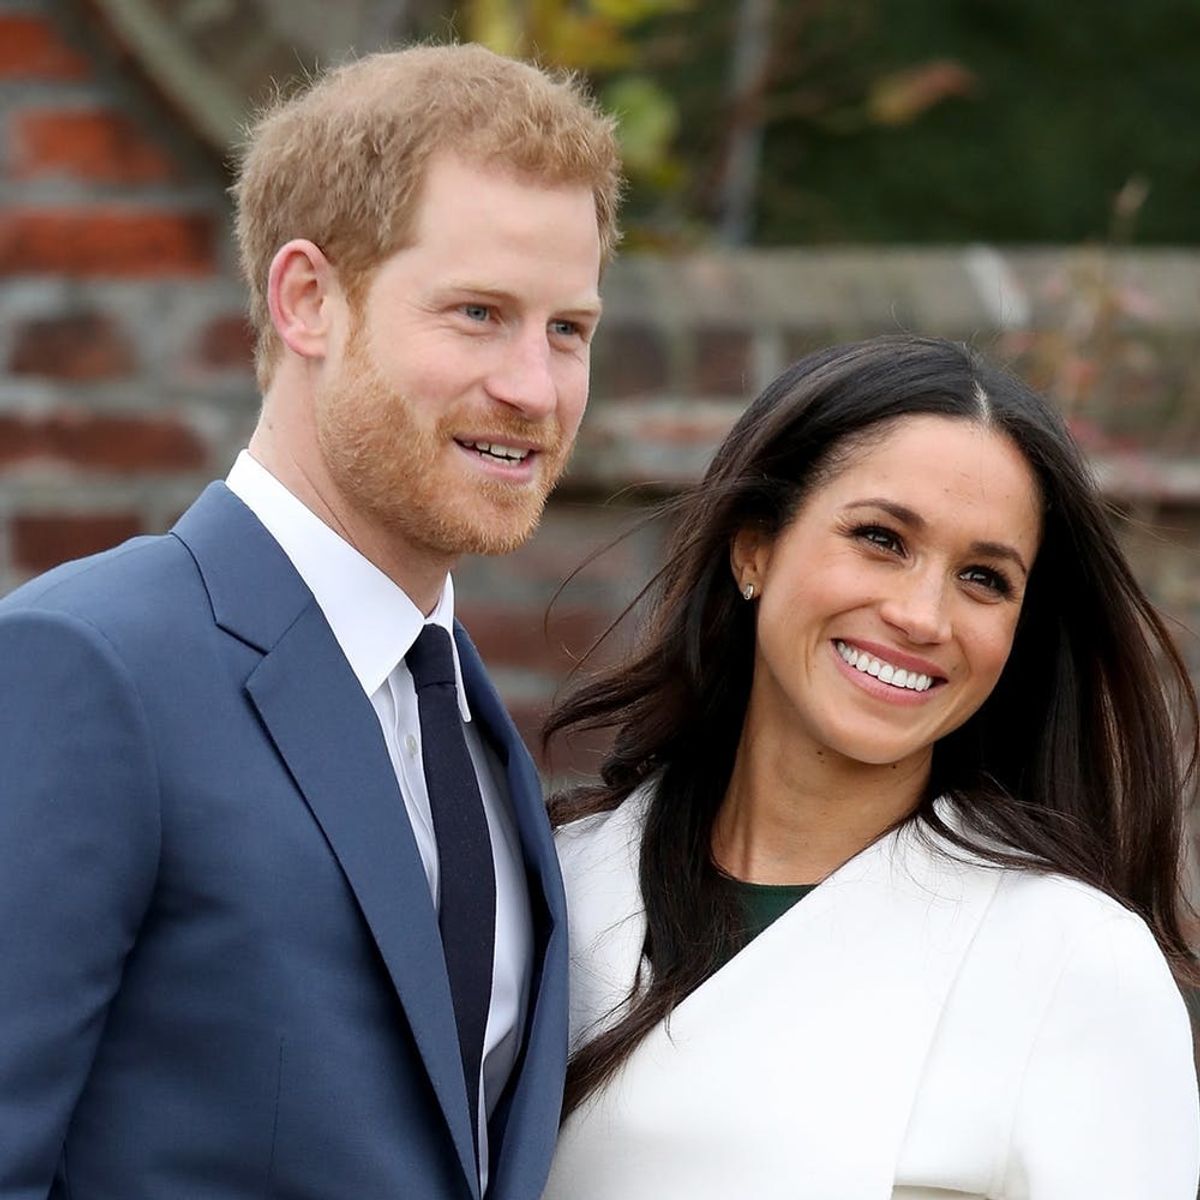 This Is the Carriage Prince Harry and Meghan Markle Have Chosen for Their Wedding Procession